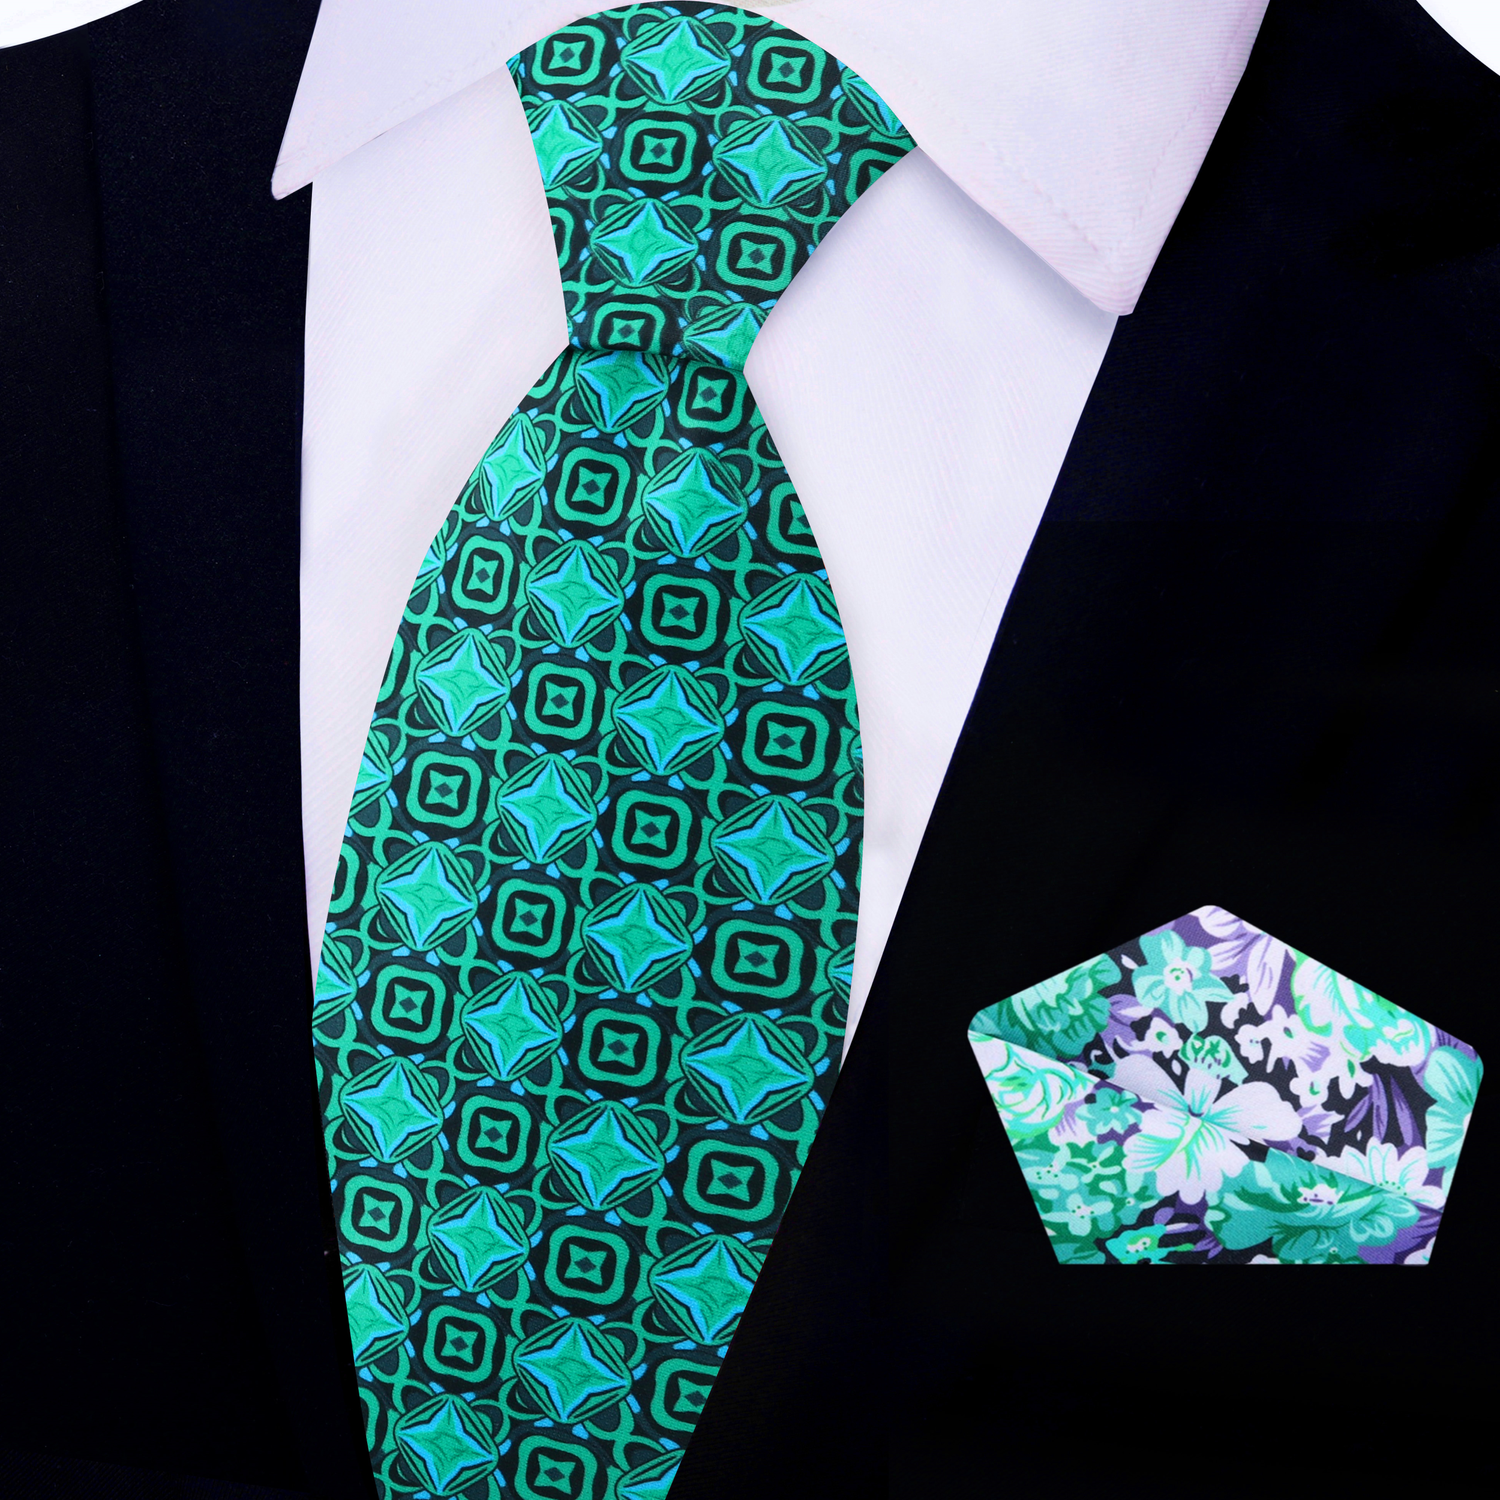 Green Geometric Tie and Green, White, Purple Floral Square